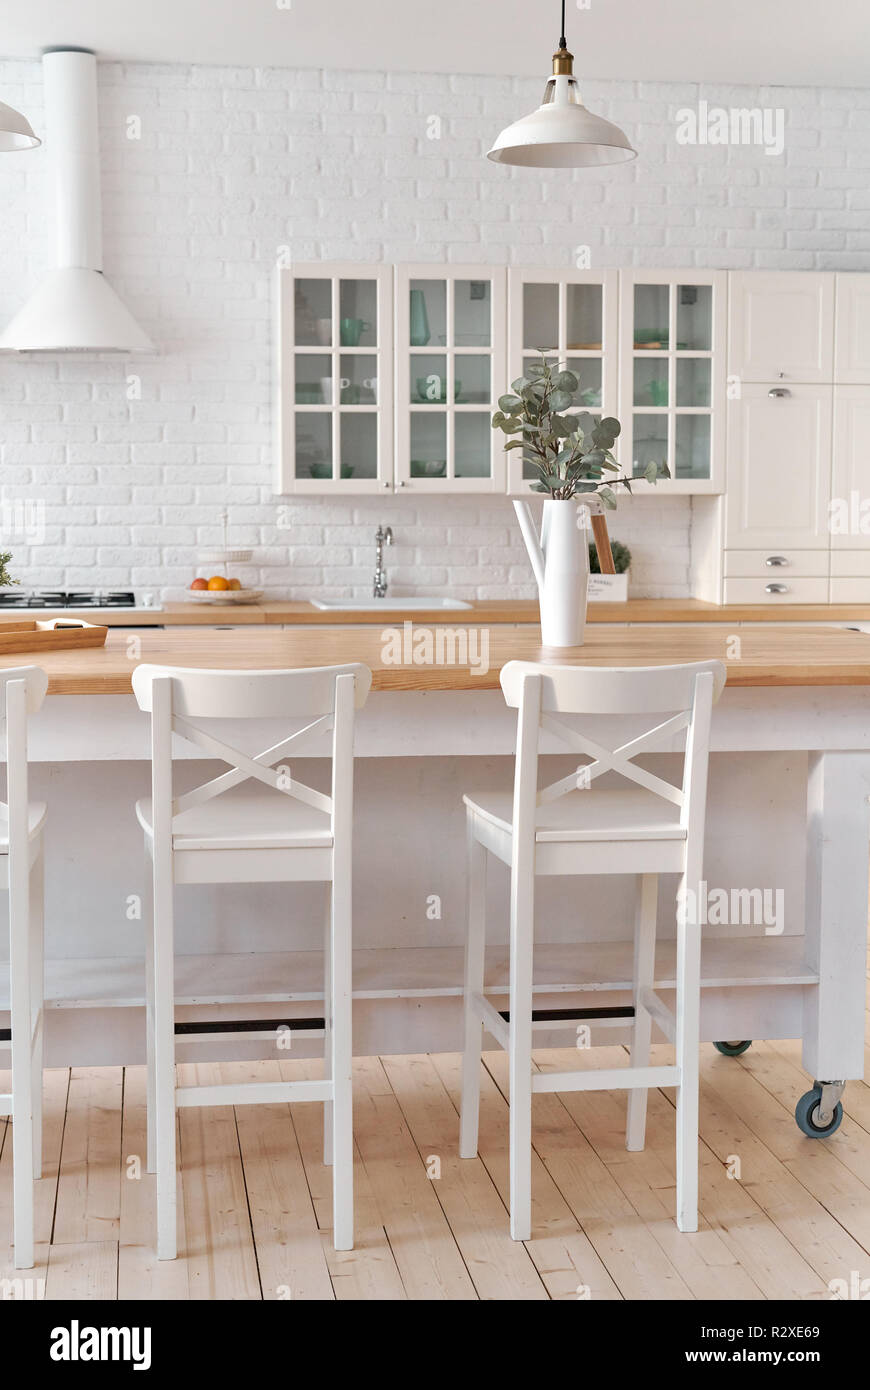 Kitchen table with kitchen chairs. Kitchen background. Stock Photo